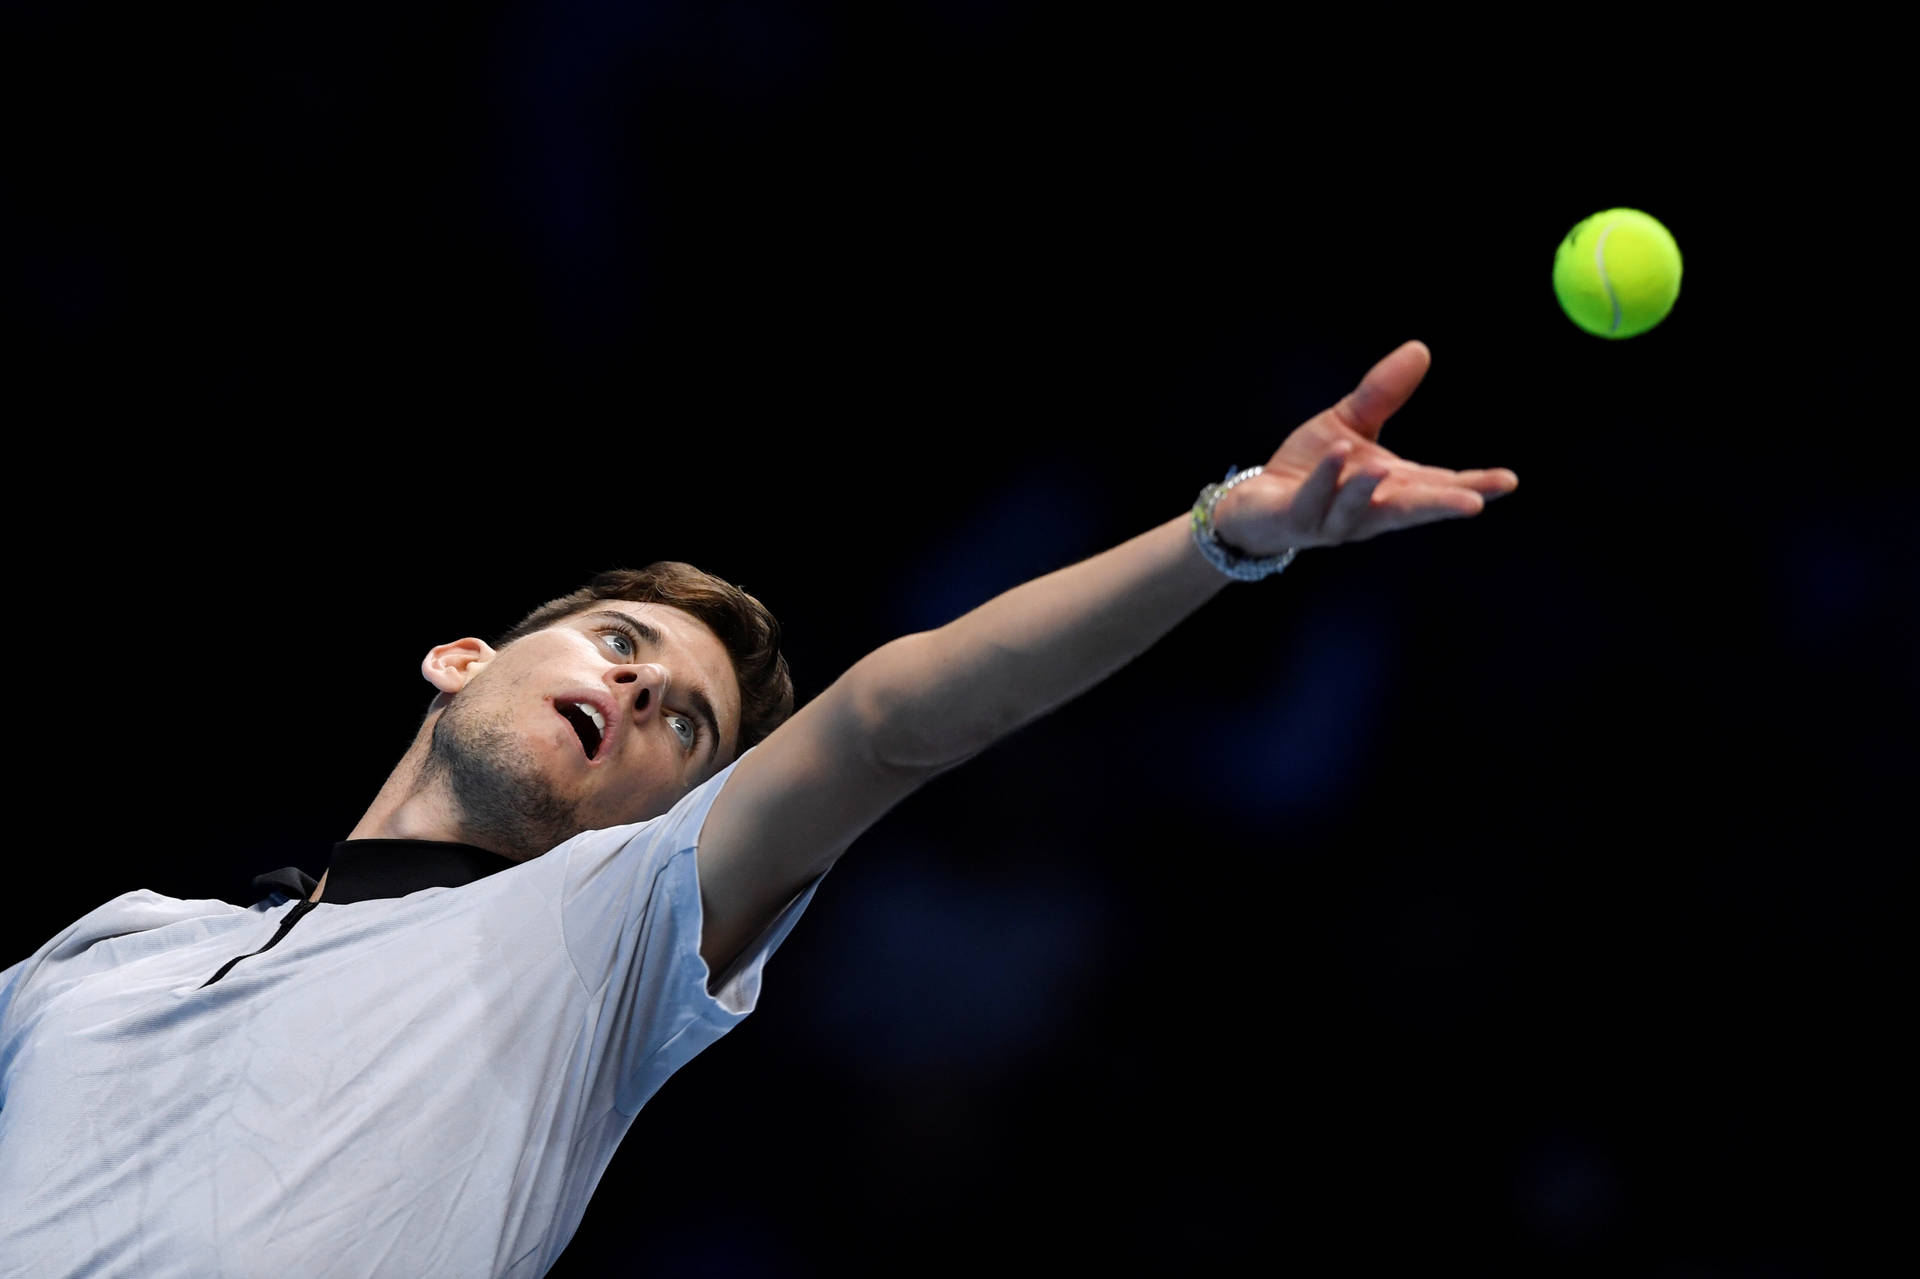 Caption: Professional tennis player Dominic Thiem in action Wallpaper